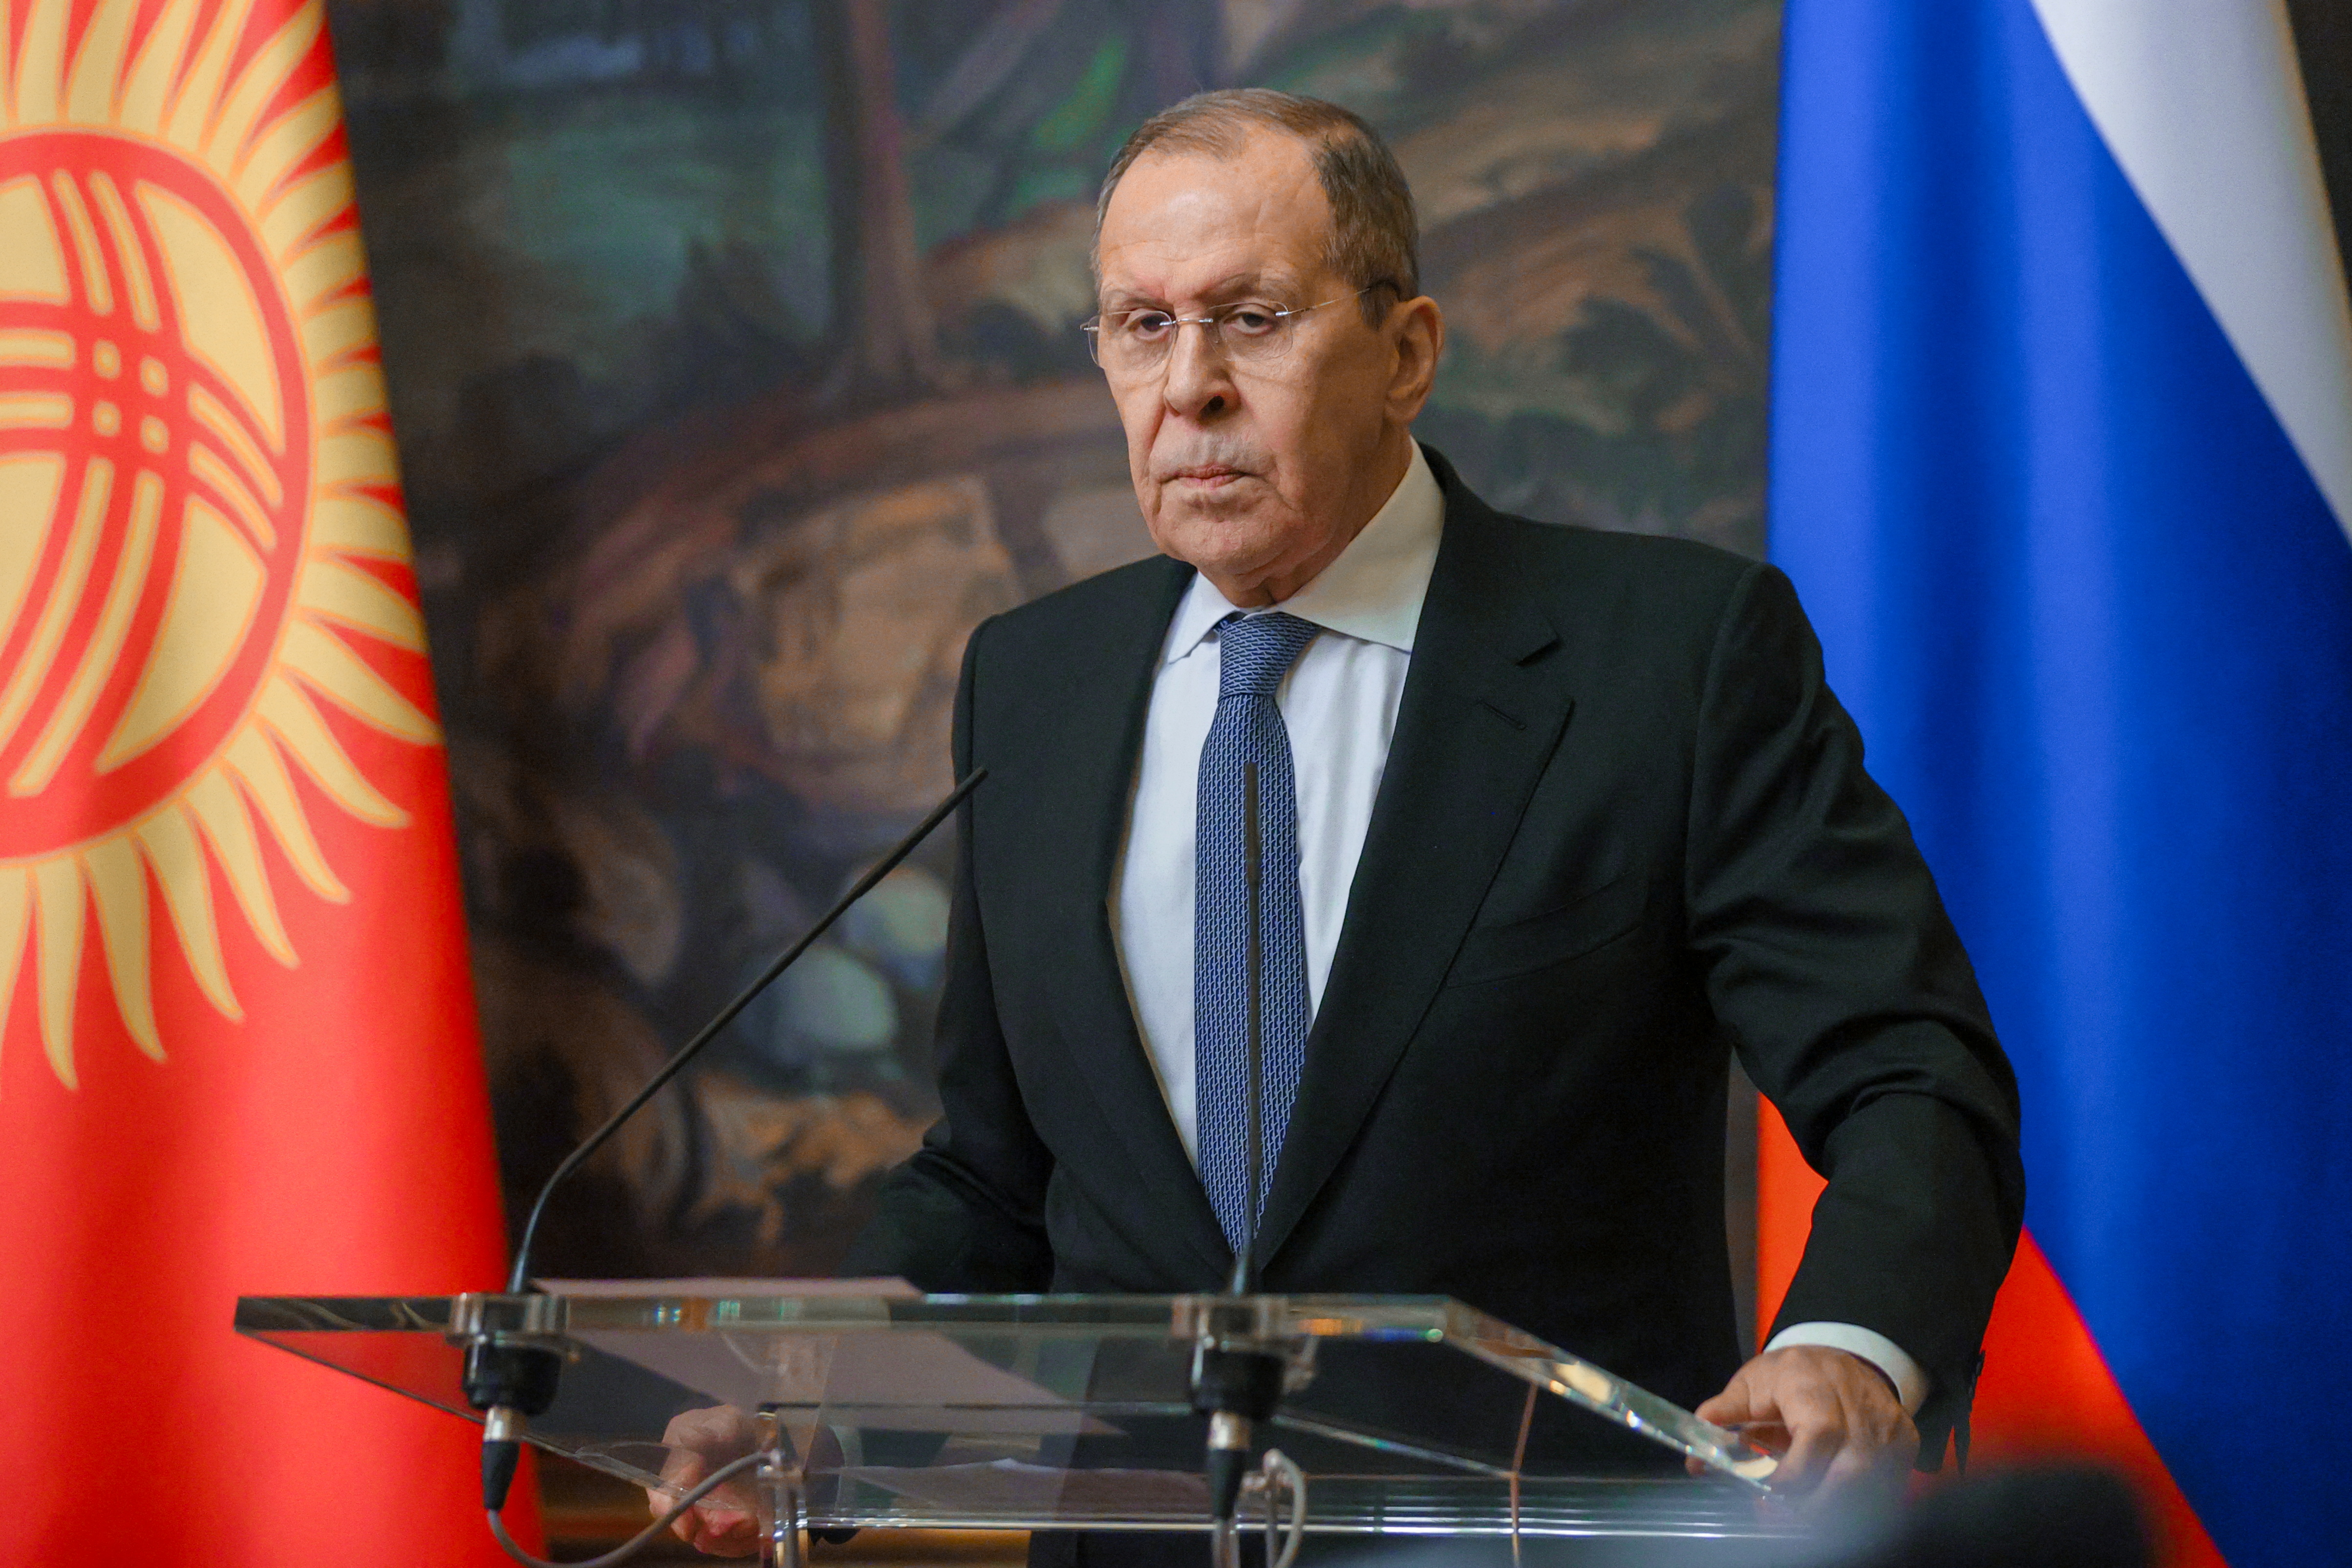 Russia's Foreign Minister Lavrov and Kyrgyzstan's Foreign Minister Kazakbayev meet in Moscow